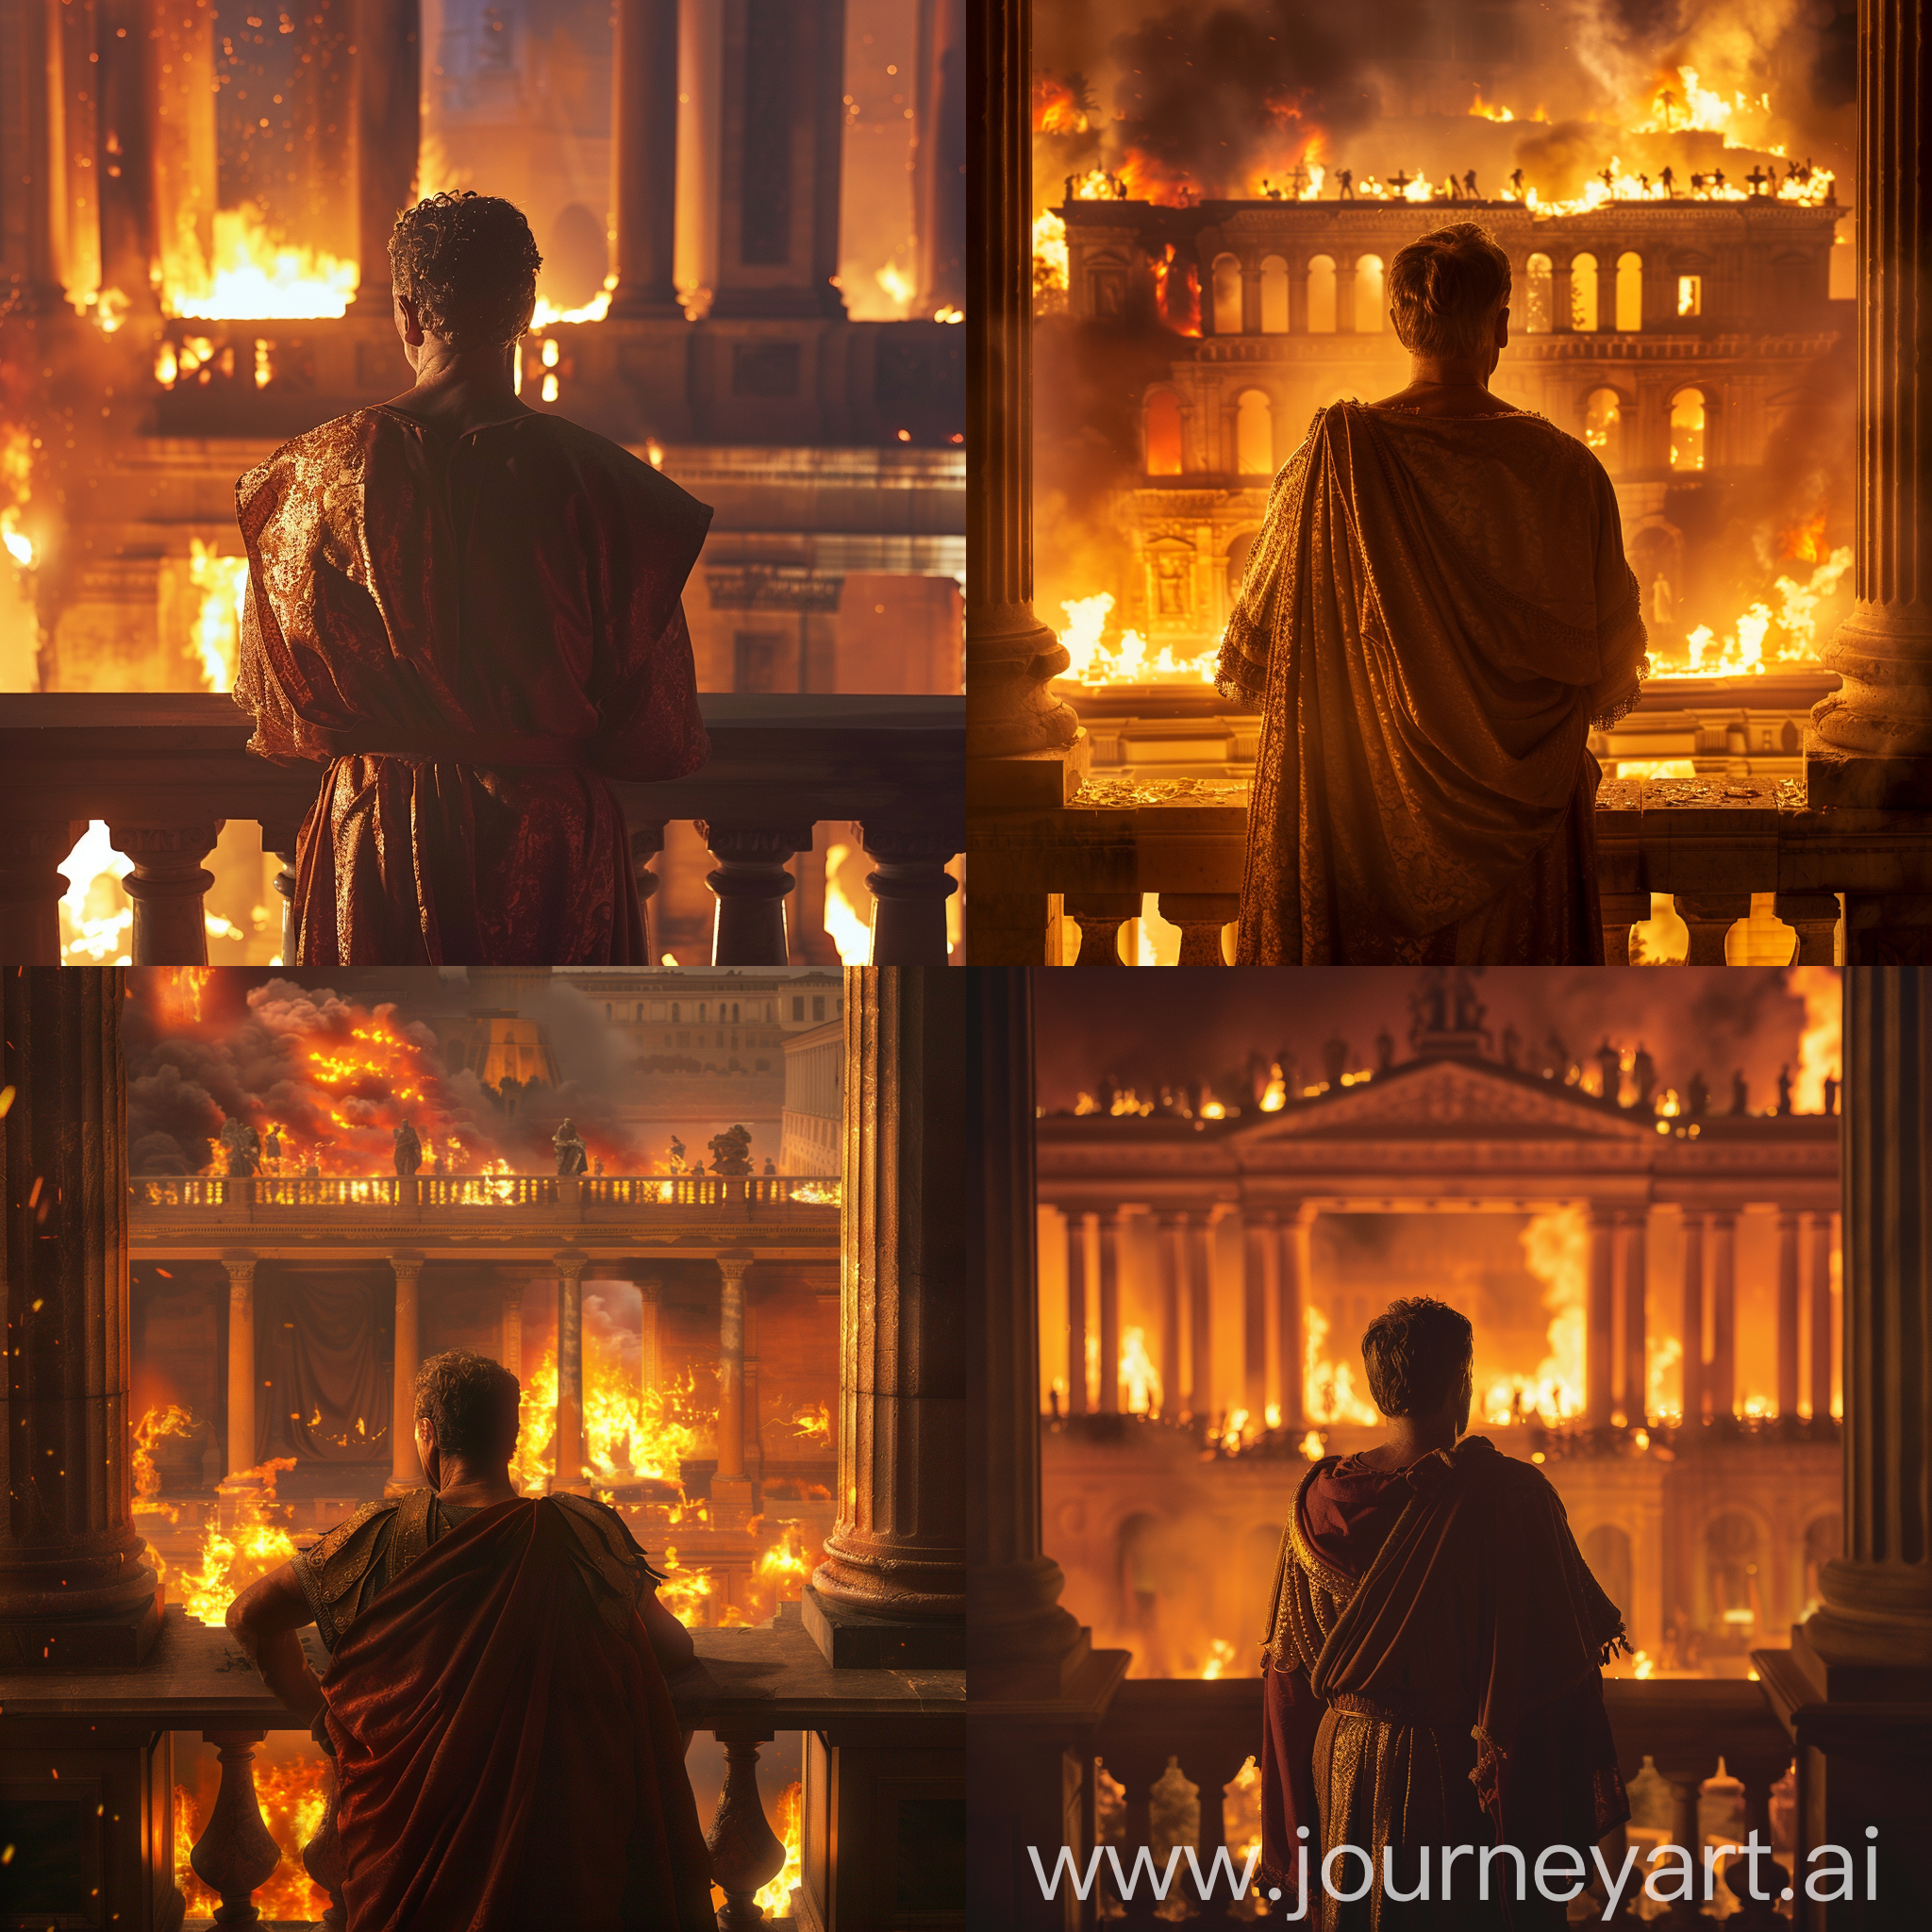 Back view of Emperor Nero watching the Great Fire at Rome on his palace balcony, he is in Roman robe attire, great fire blaze at Ancient Rome, dramatic lighting